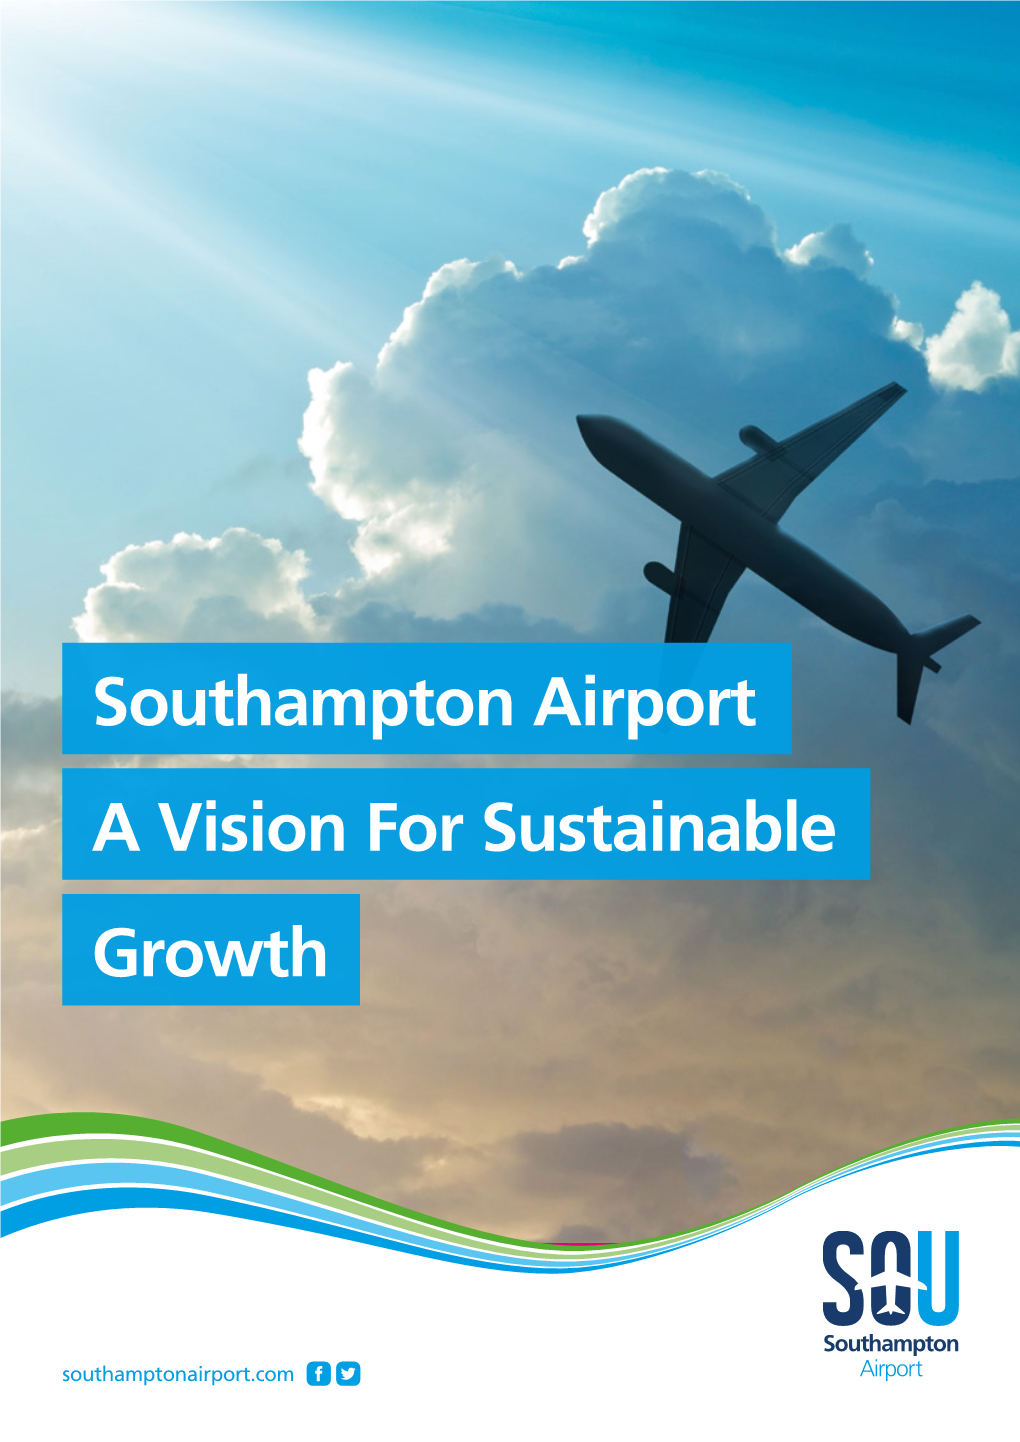 Southampton Airport a Vision for Sustainable Growth